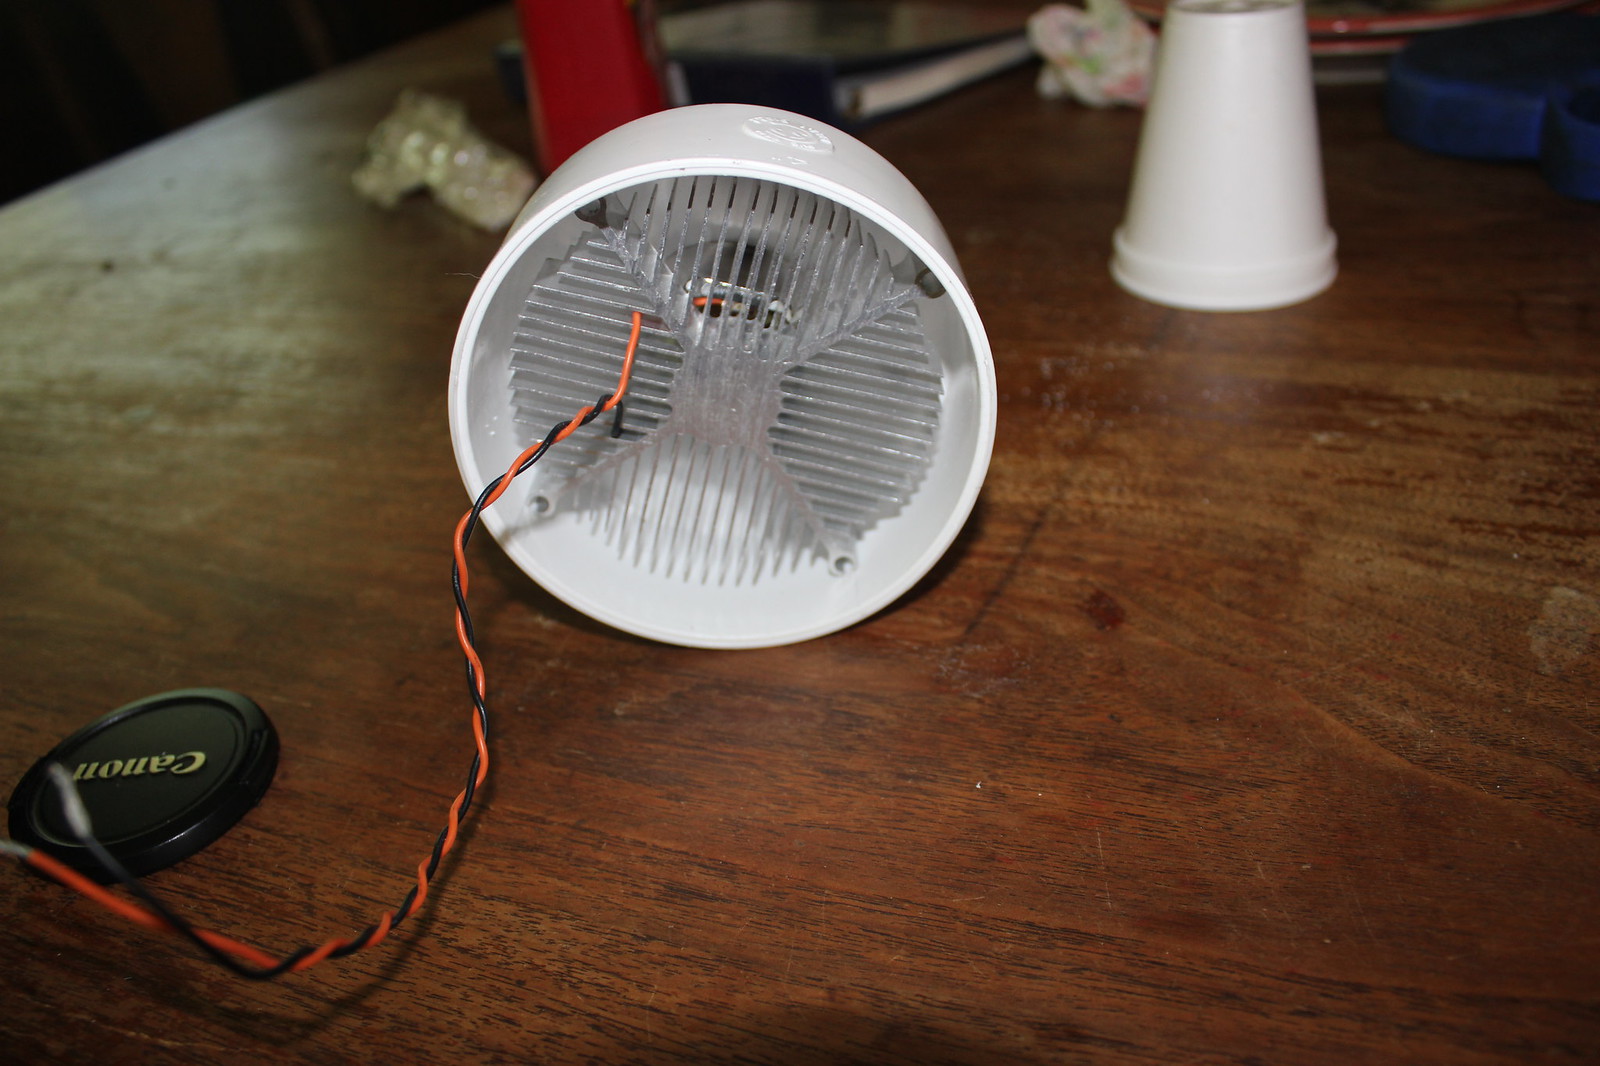 this heatsink/led is just push fit.. its actually tight enough to not need any screws to hold it in place.